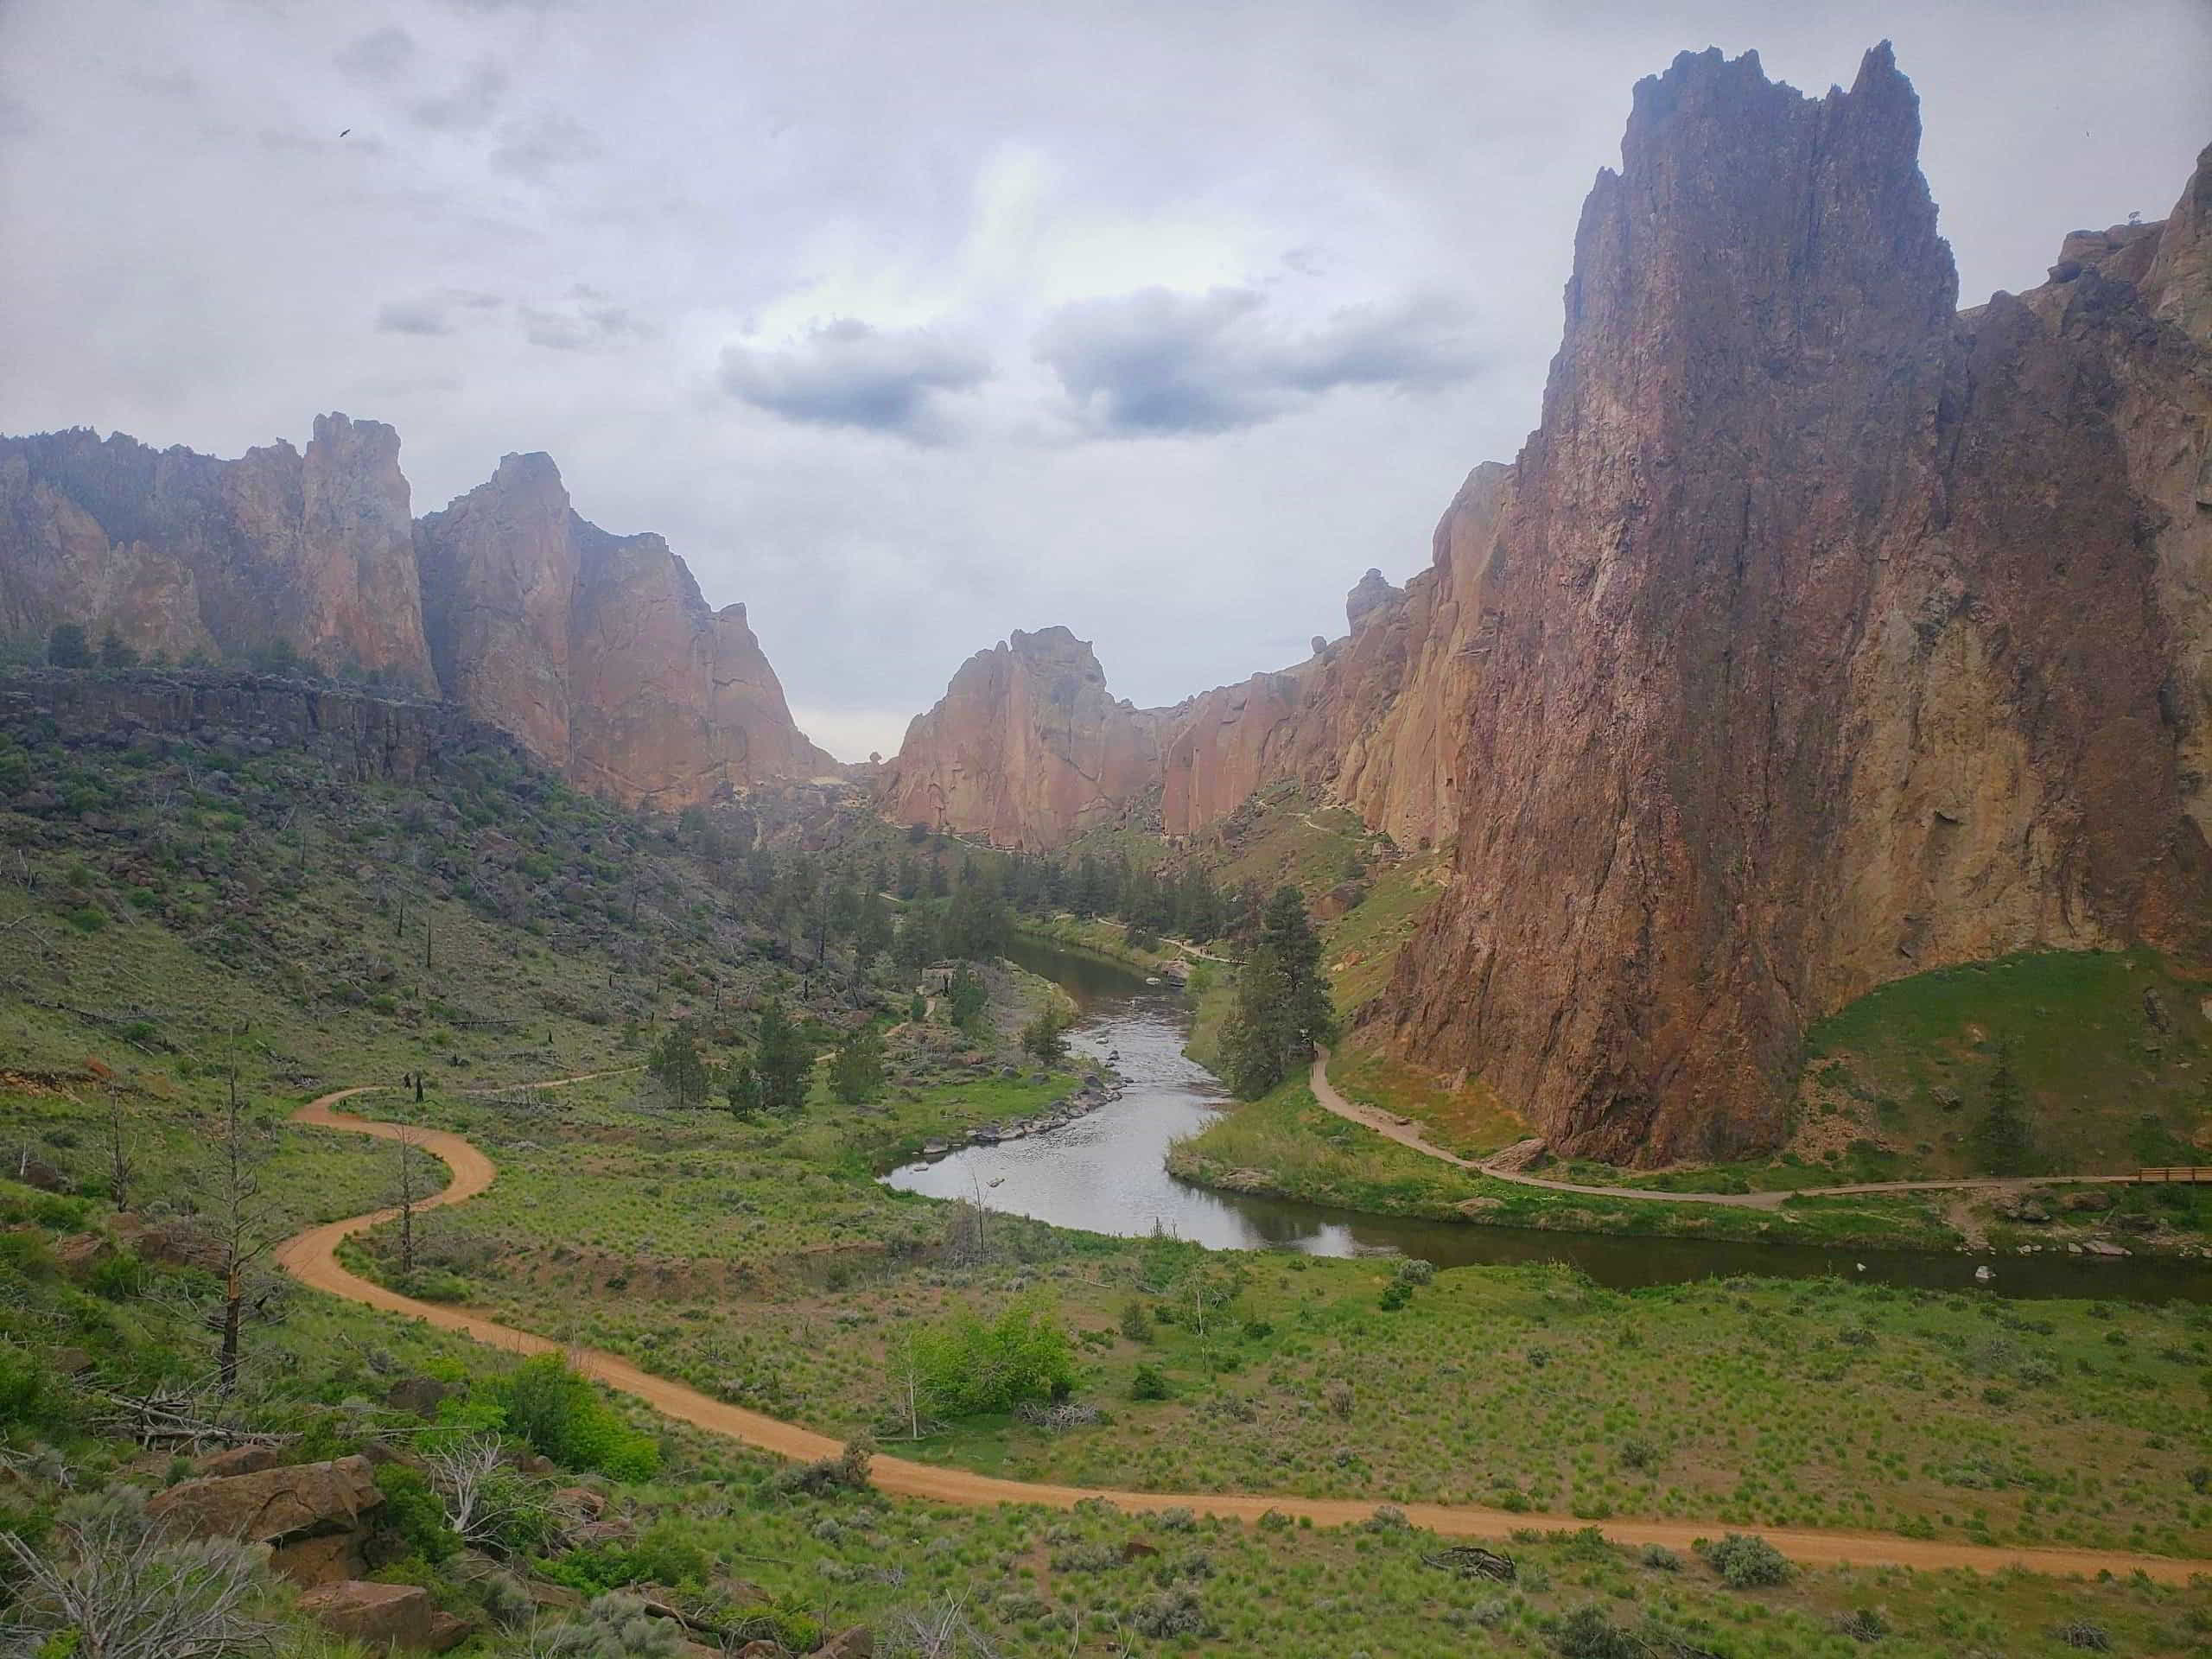 Smith rock, with a red path winding in the foreground, and the river and jagged rocks in the background